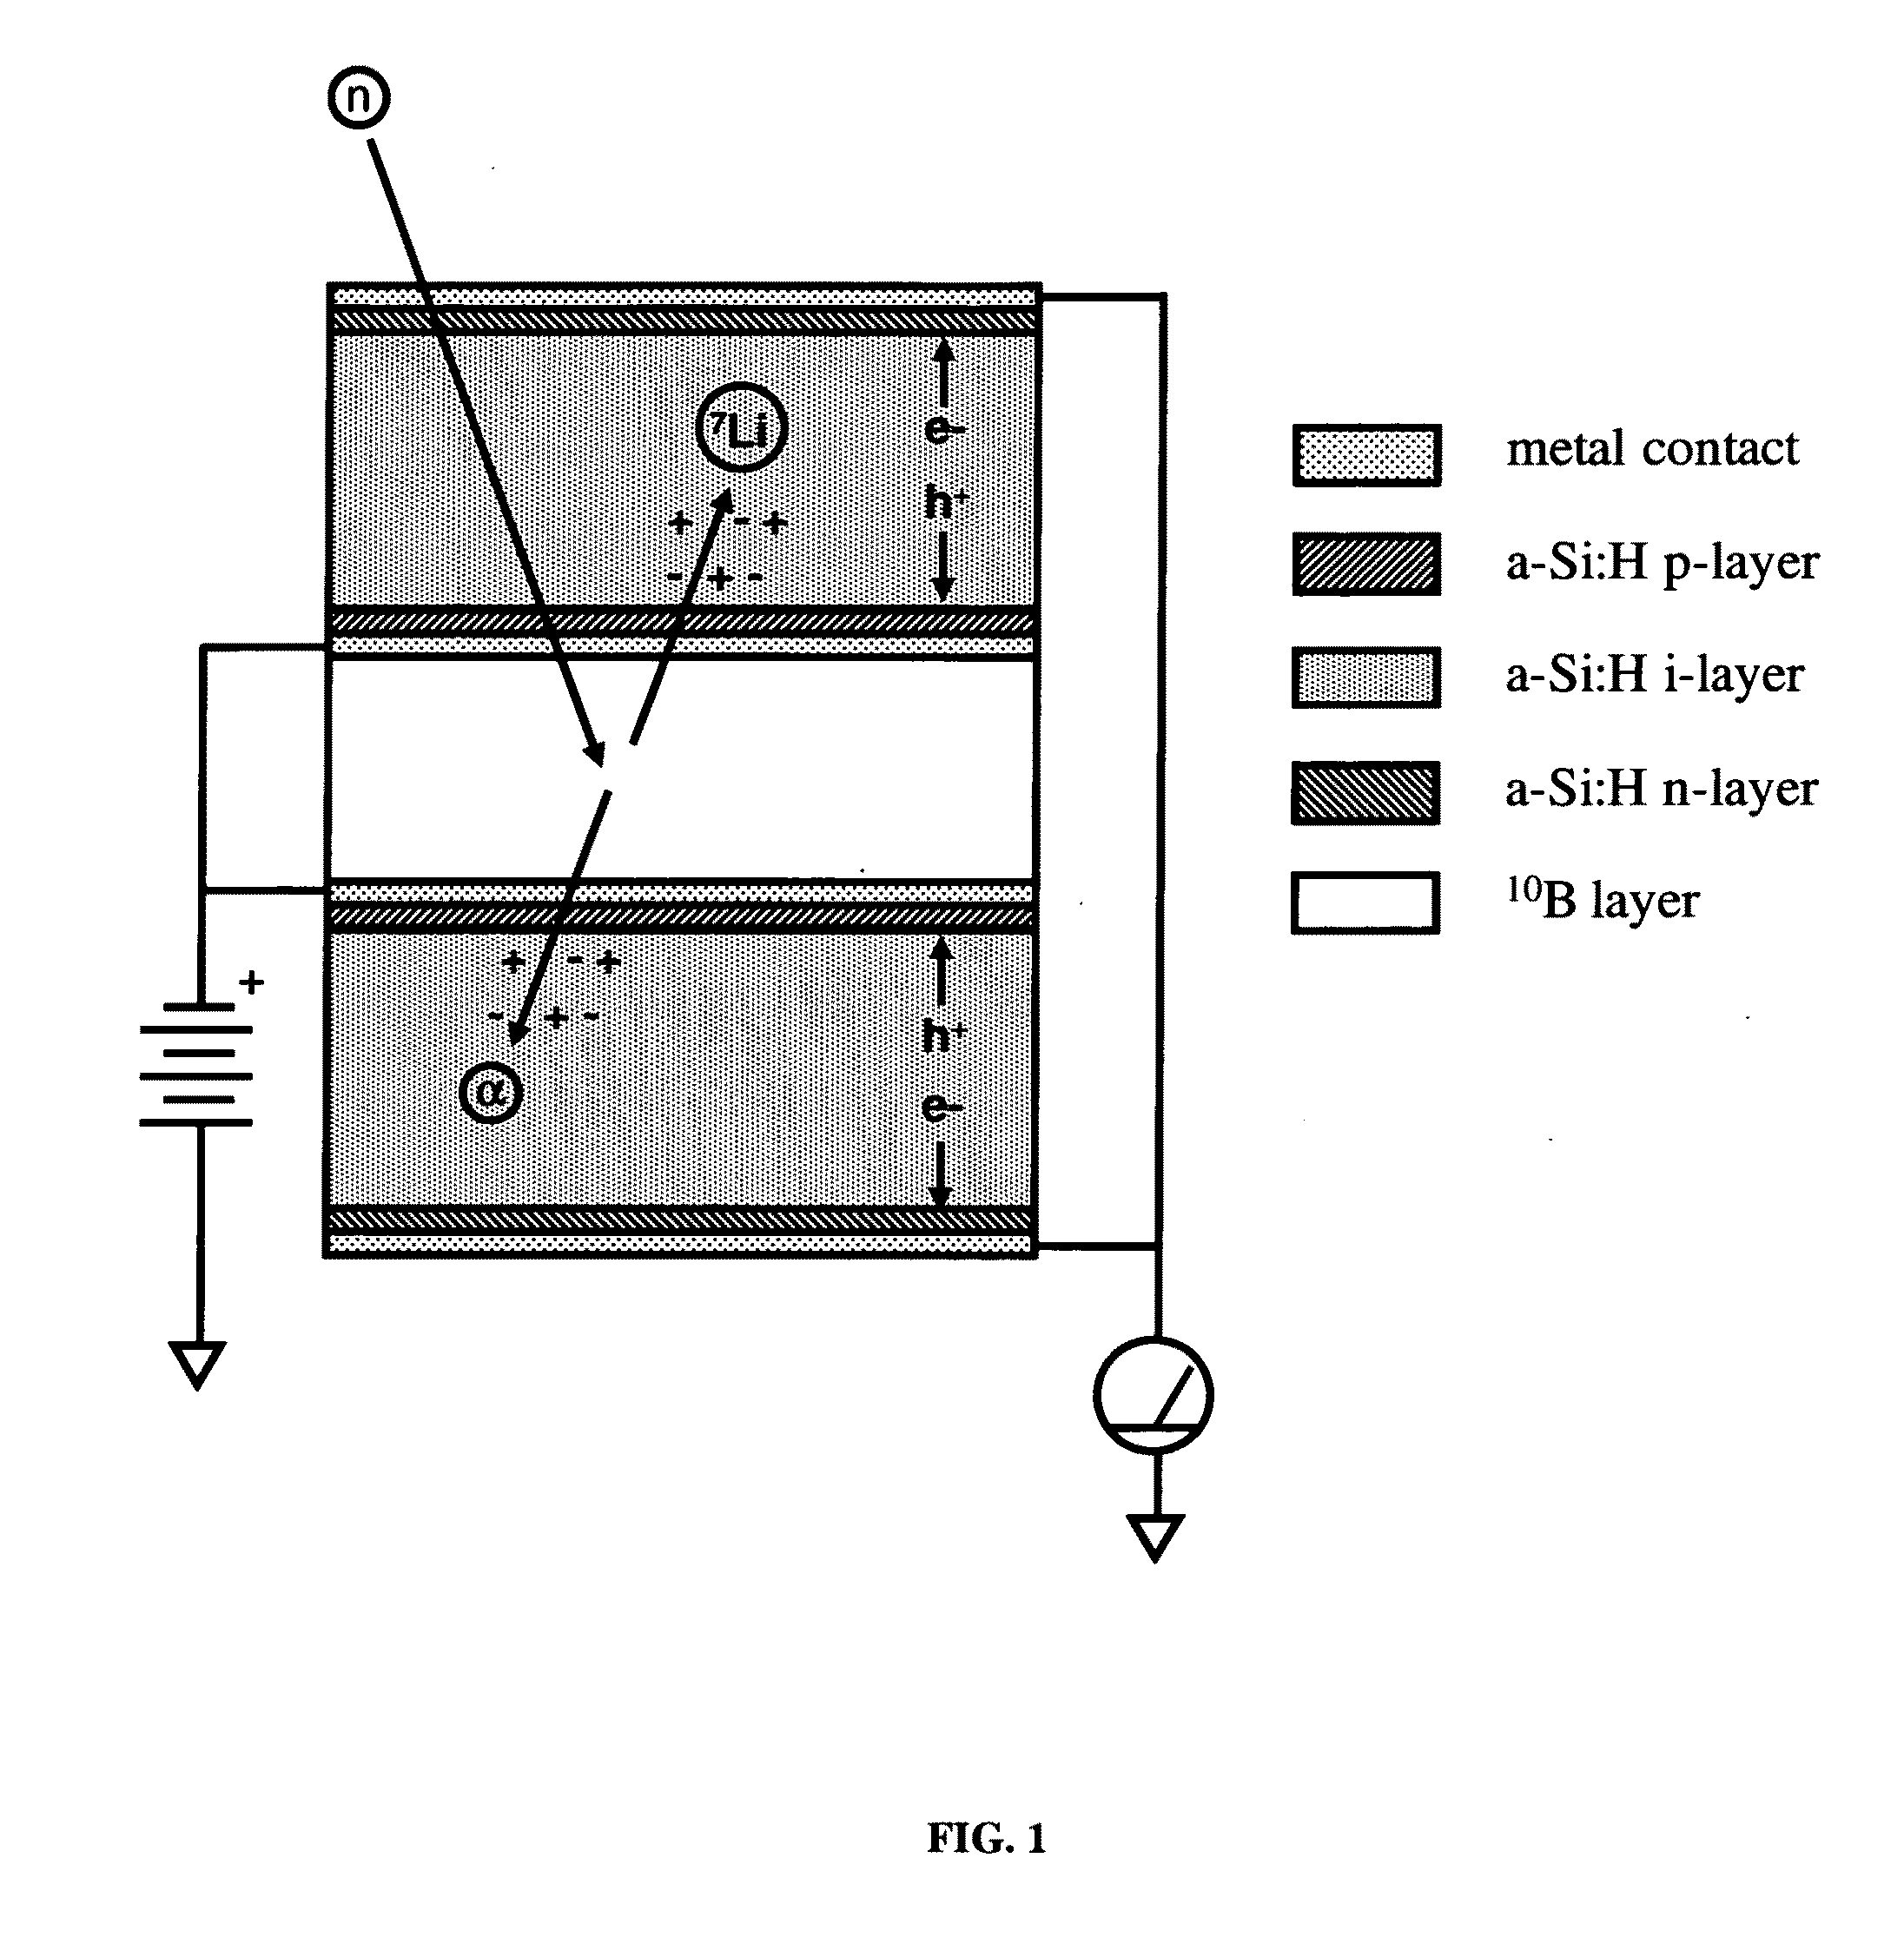 Solid state neutron detector